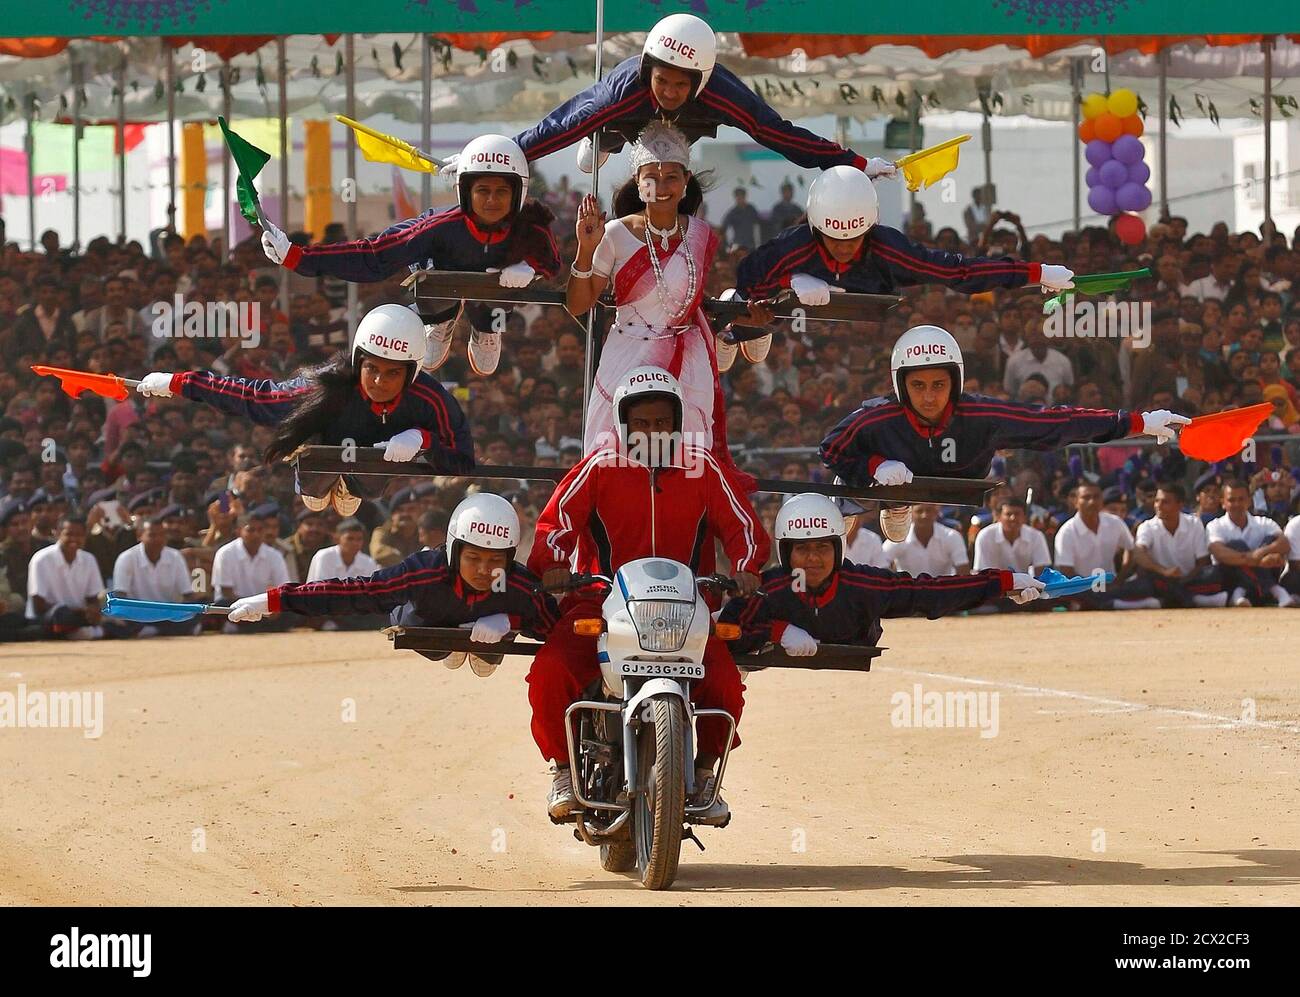 Members from the Gujarat Police perform a dare-devil show on their motorcycle during Republic Day celebrations at Himmatnagar town, about 69 km (43 miles) east from the western Indian city of Ahmedabad, January 26, 2014. India celebrates its 65th Republic Day on Sunday. REUTERS/Amit Dave (INDIA - Tags: POLITICS ANNIVERSARY SOCIETY) Stock Photo